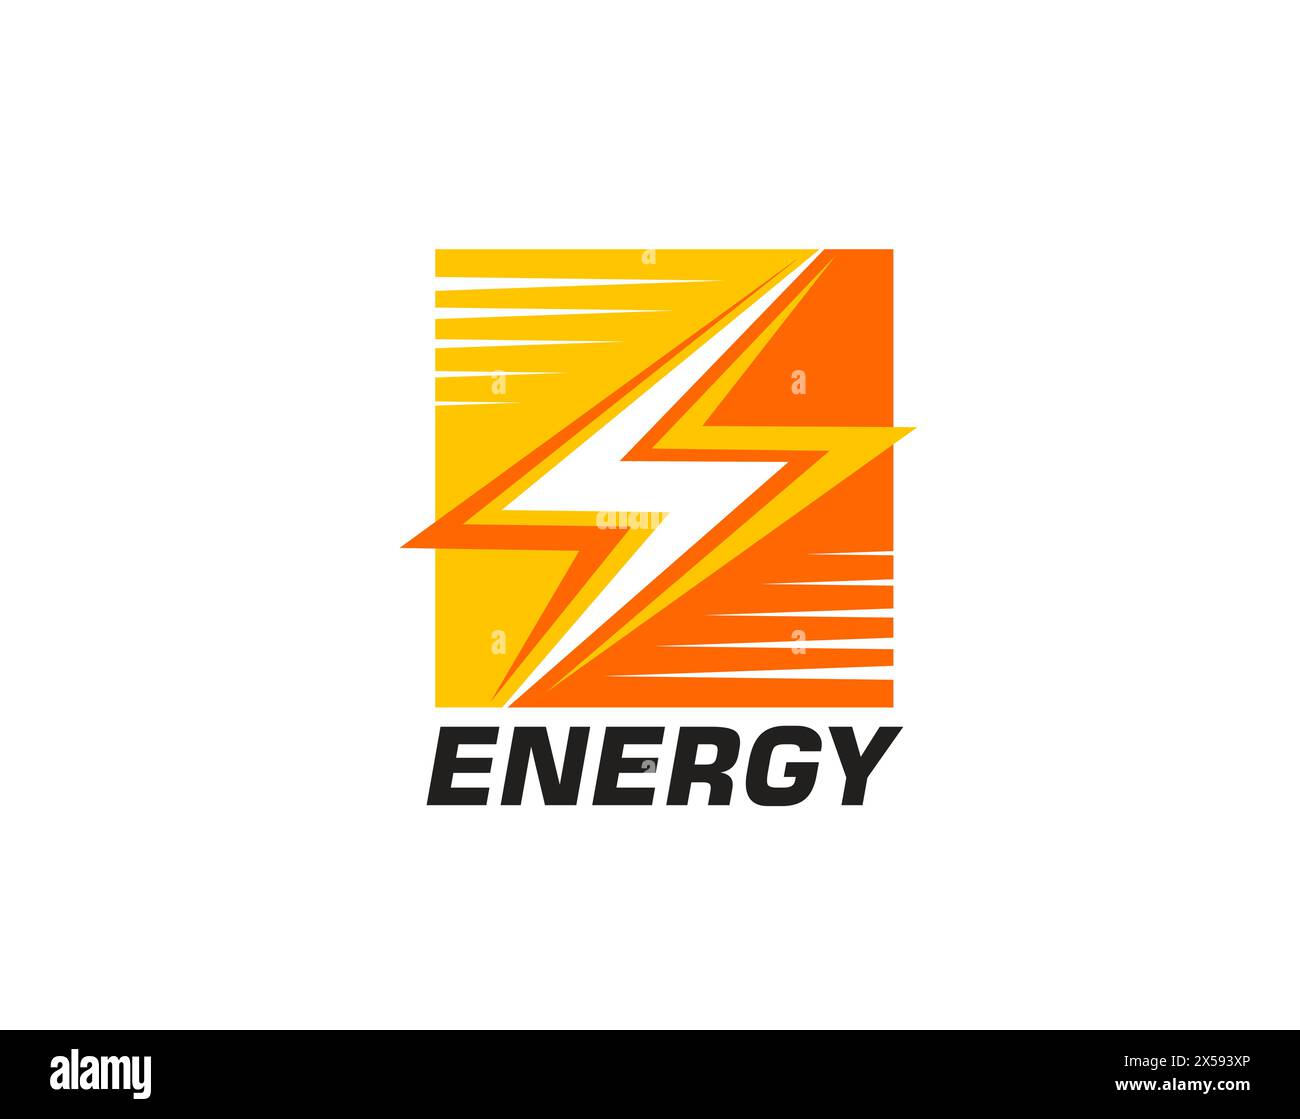 Electric energy icon featuring stylized dynamic lightning bolt or flash. Isolated vector emblem in red and orange colors symbolizing power, battery charge, efficiency and modern electrical solutions Stock Vector